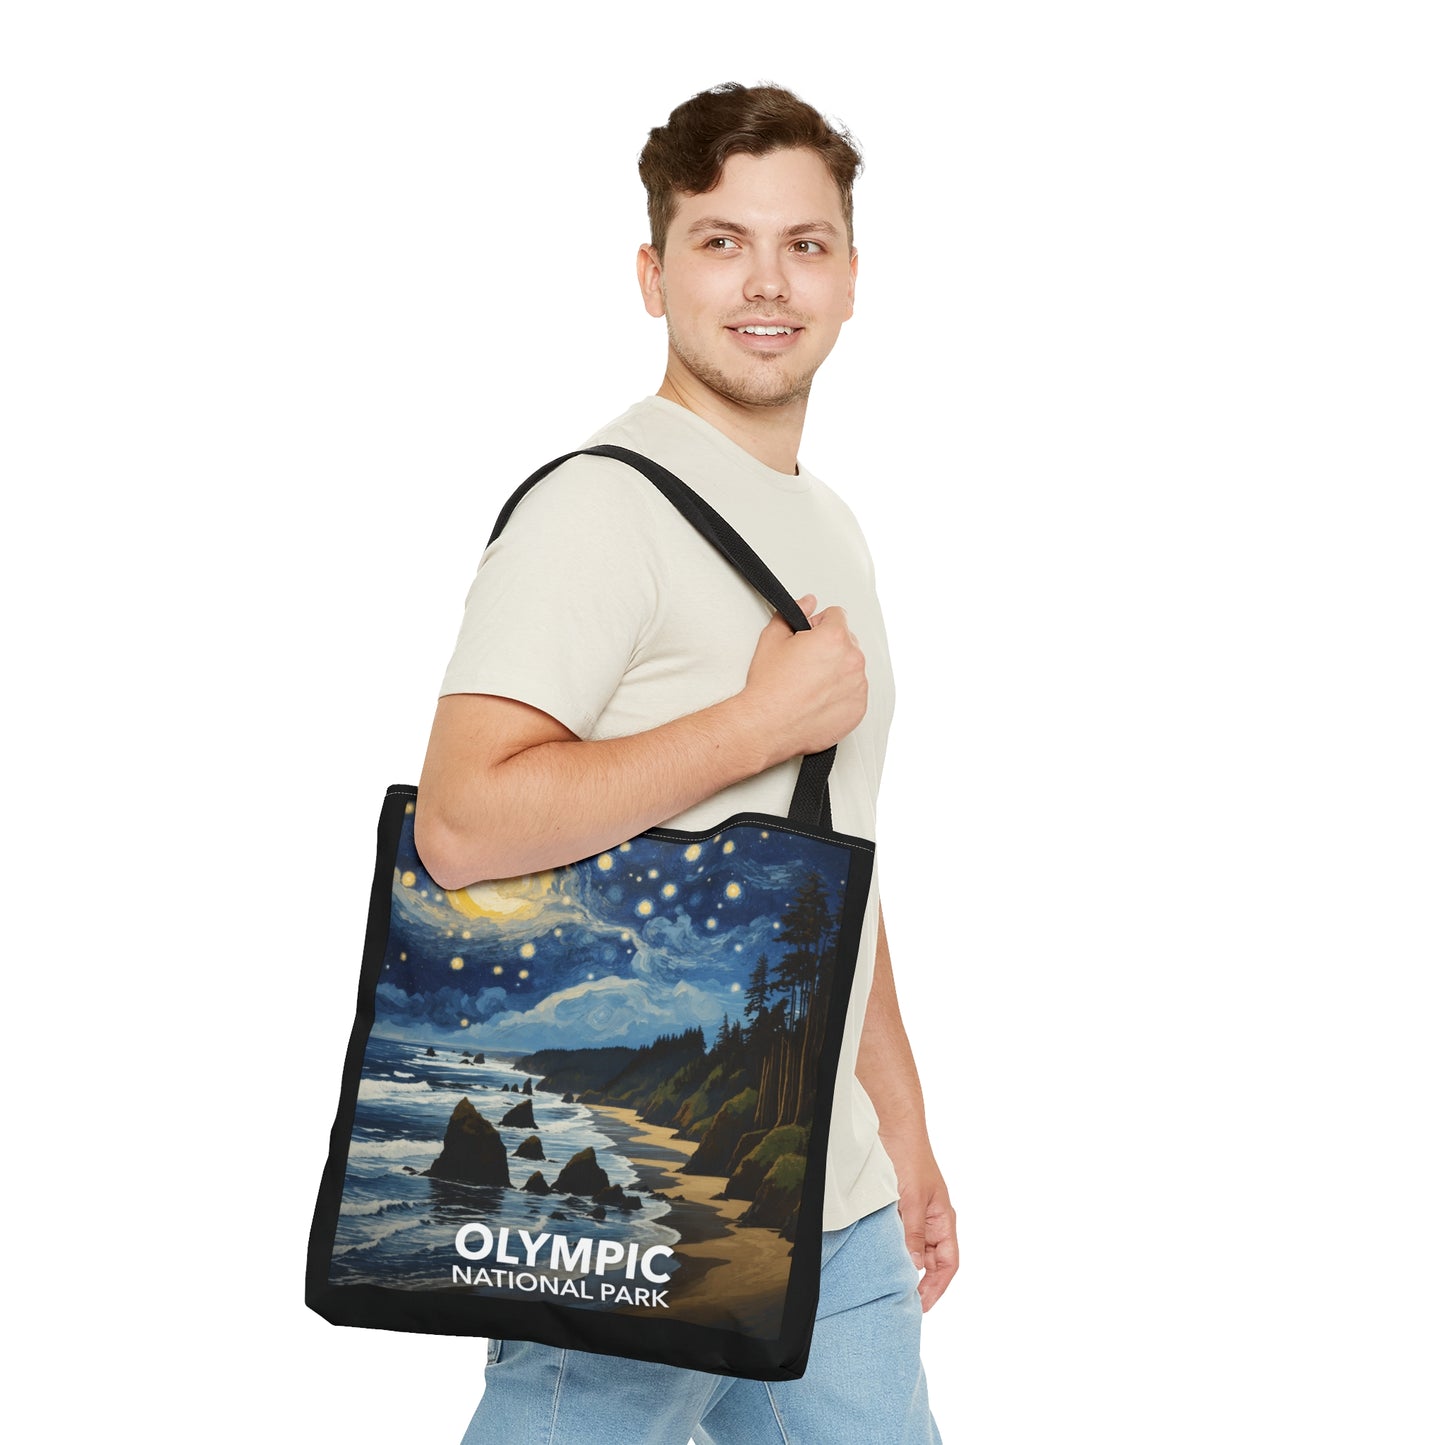 Olympic National Park Tote Bag - The Starry Night